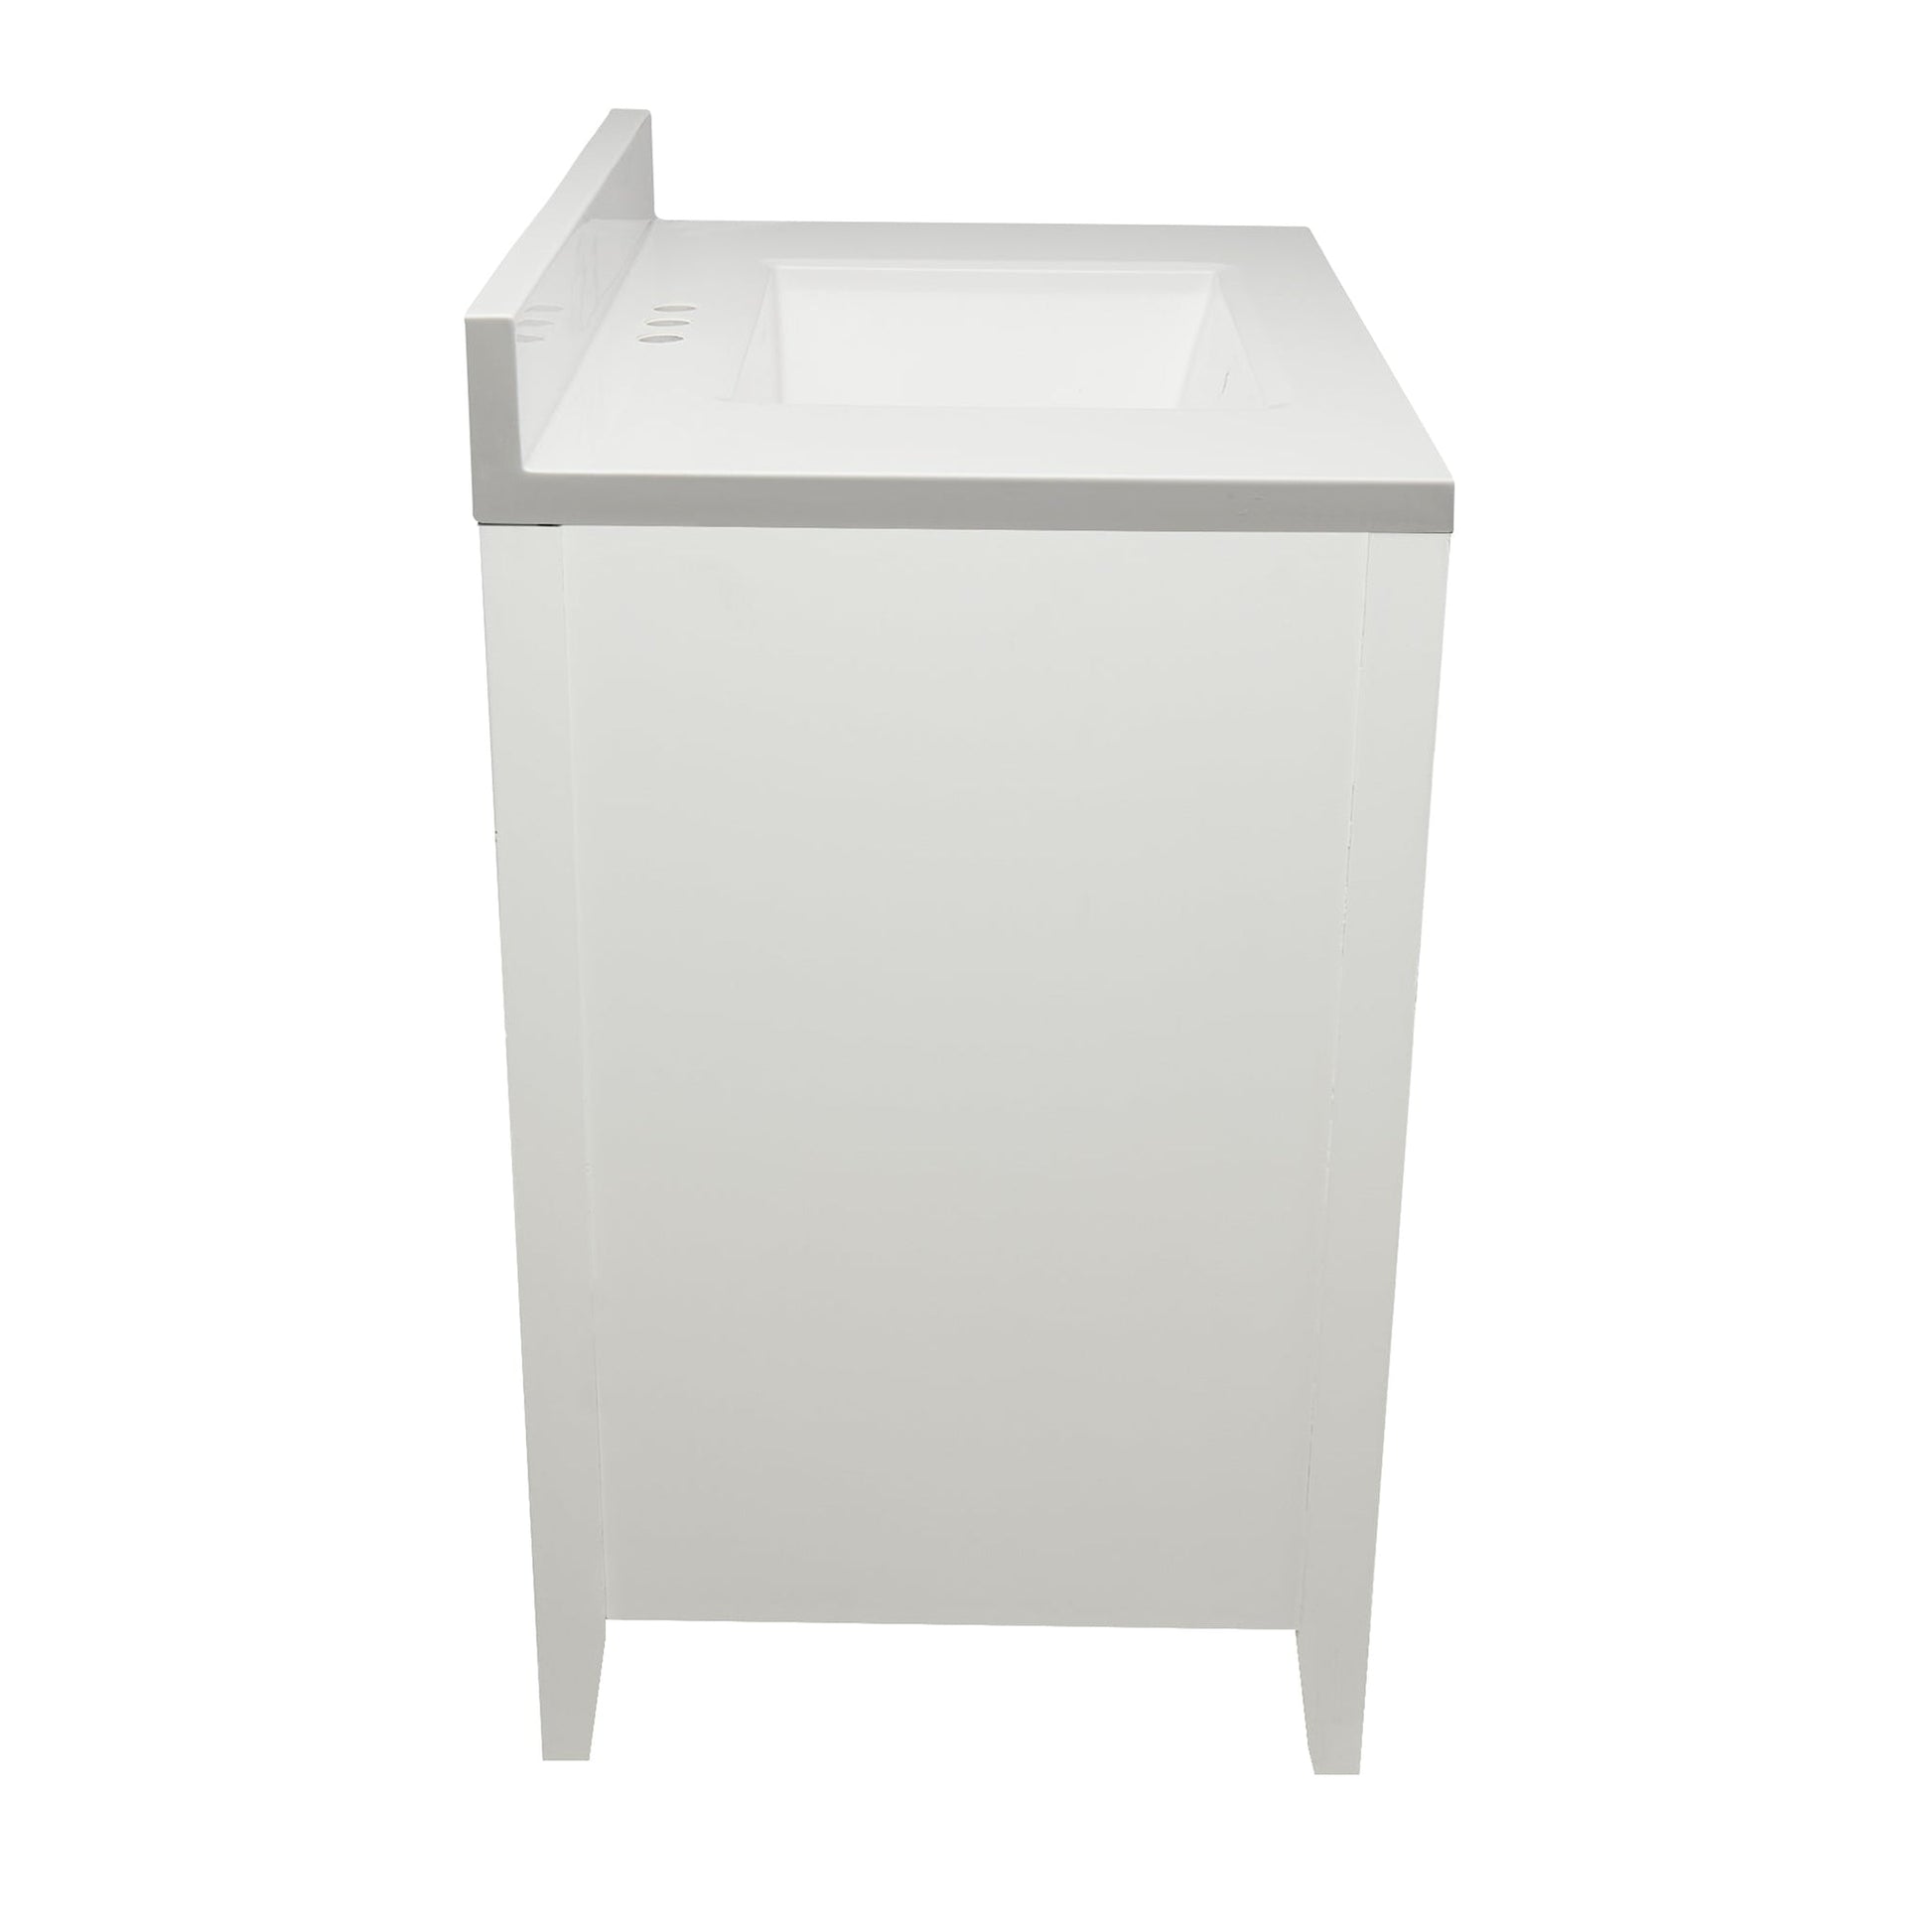 Ella's Bubbles Zermatt 31" White Bathroom Vanity With White Cultured Marble Top With White Backsplash and Sink